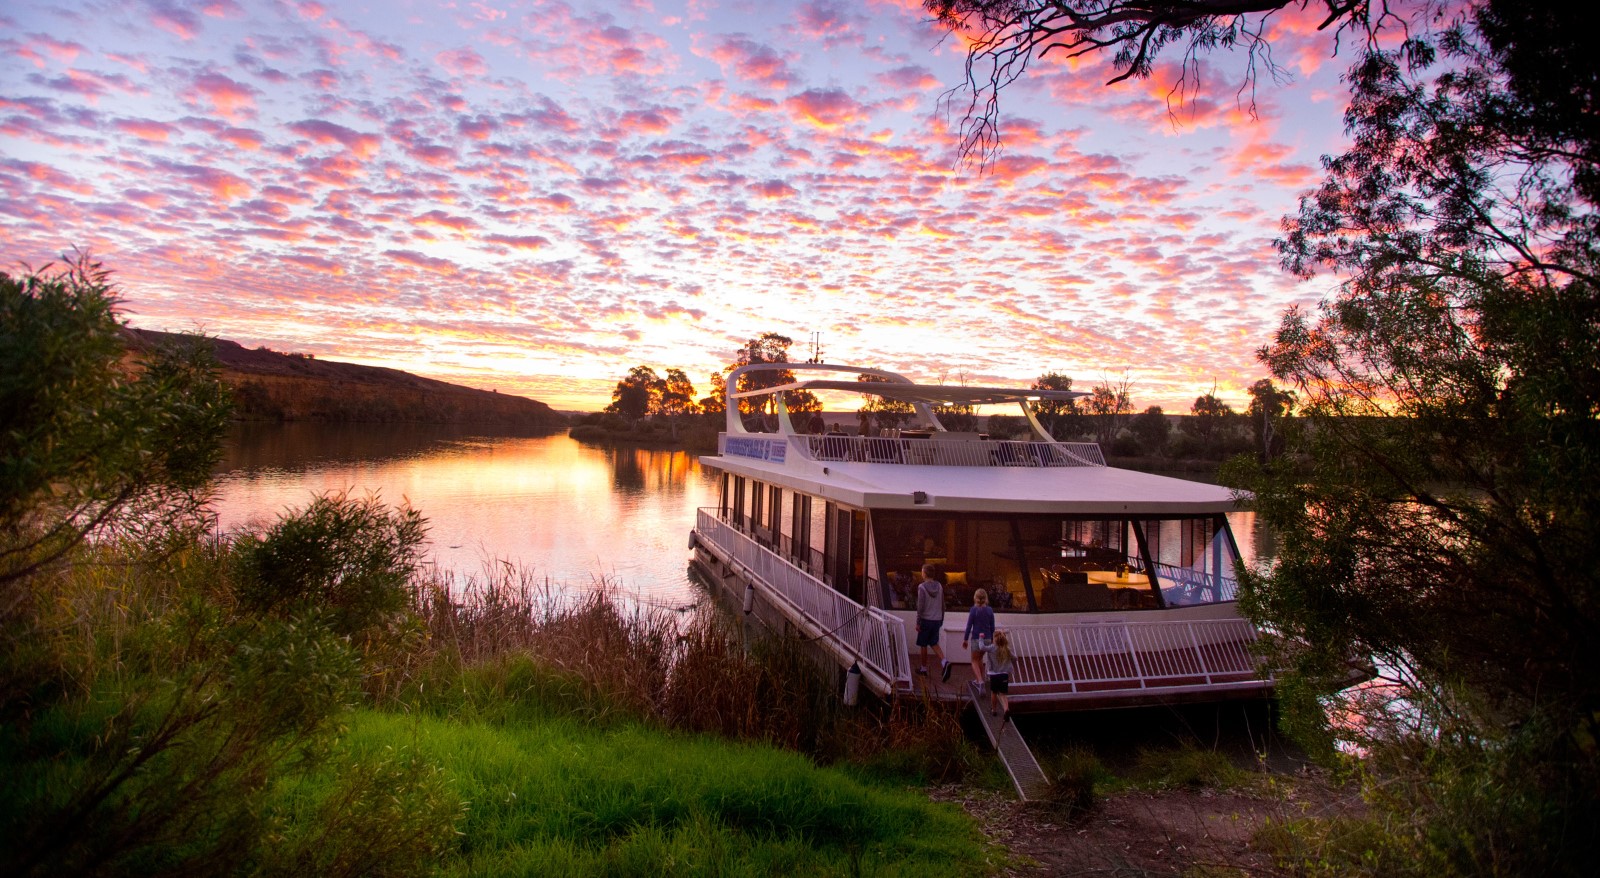 Houseboat and sunset